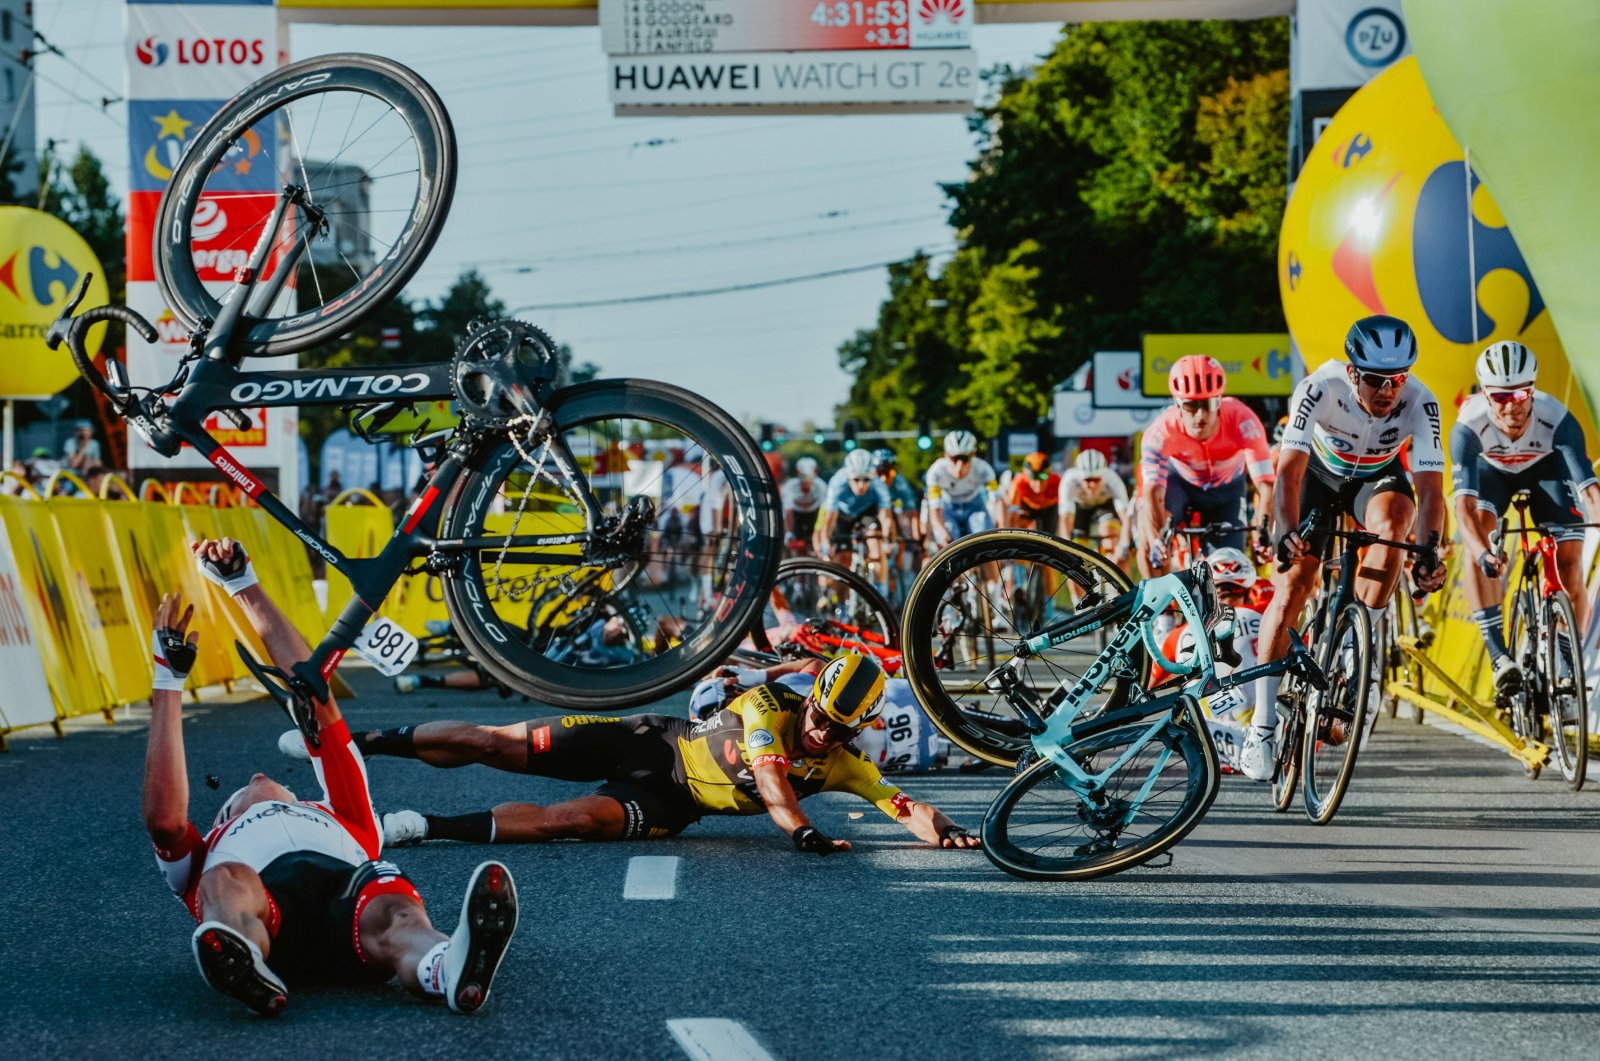 Dutch cyclist Dylan Groenewegen, in yellow jersey, and fellow riders collide during the opening stage of the Tour of Poland race in Katowice, Poland, Aug. 5, 2020. (AFP Photo)